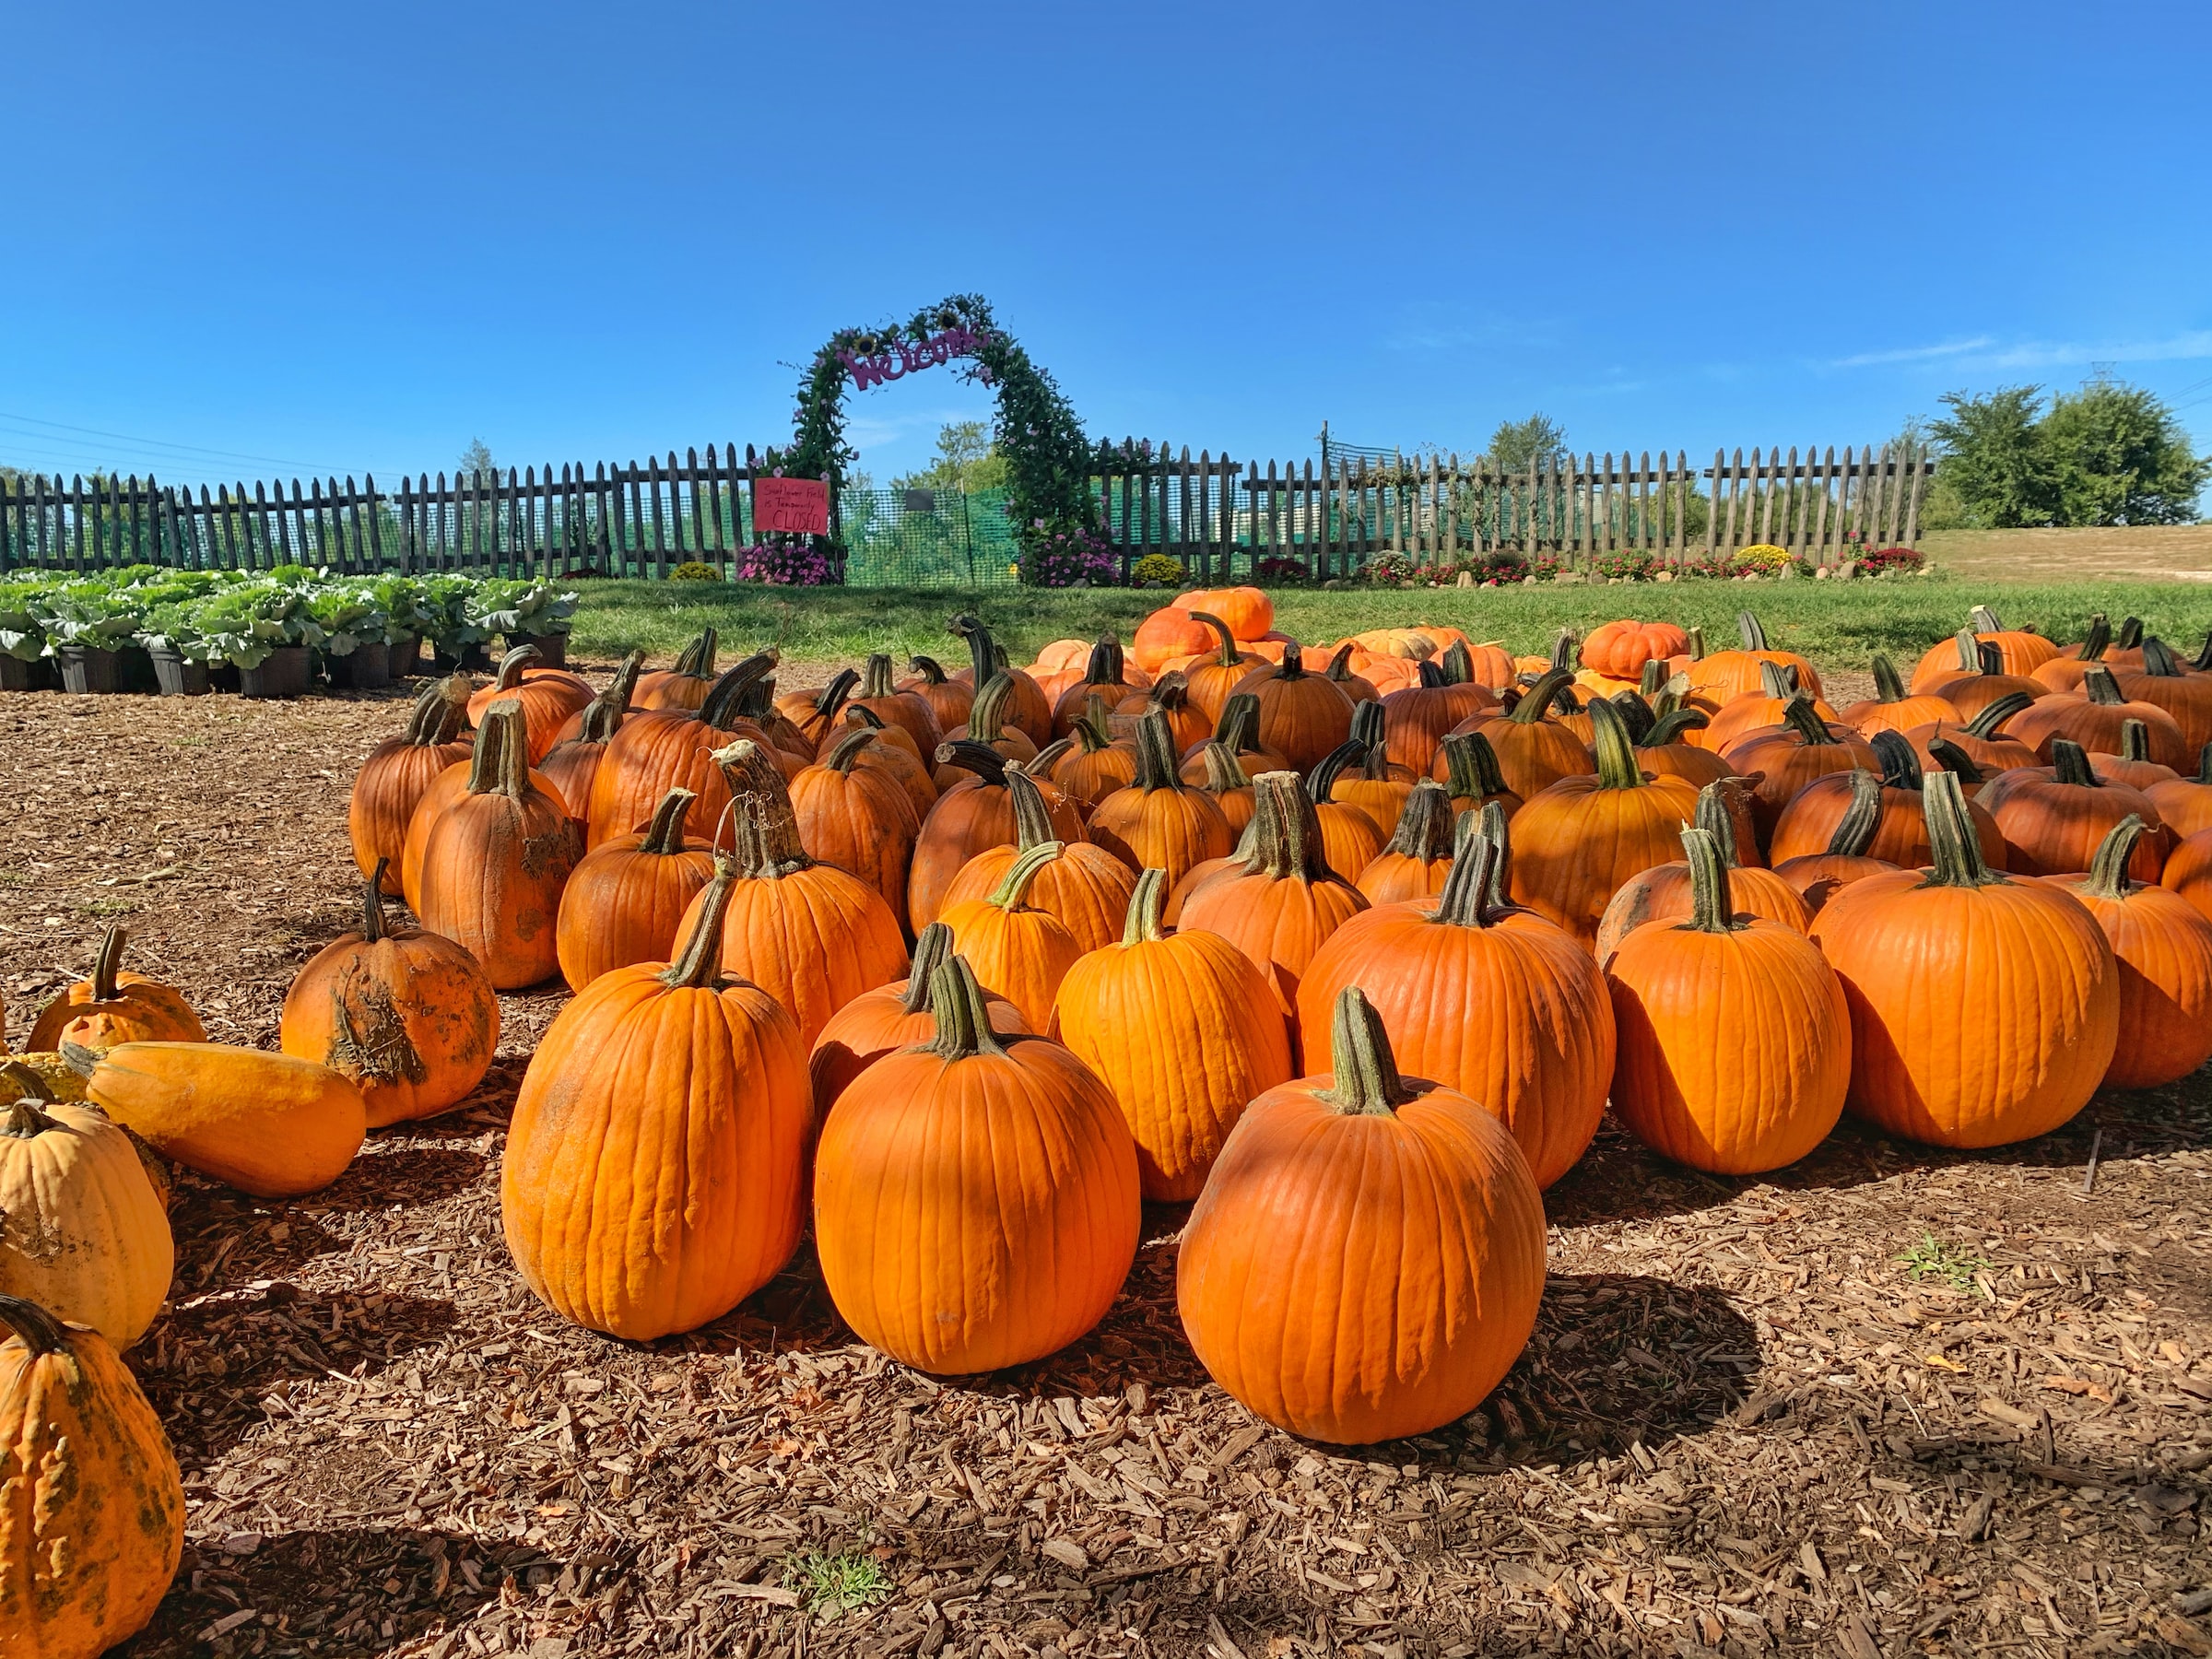 A pumpkin patch with a large pile of harvested pumpkins